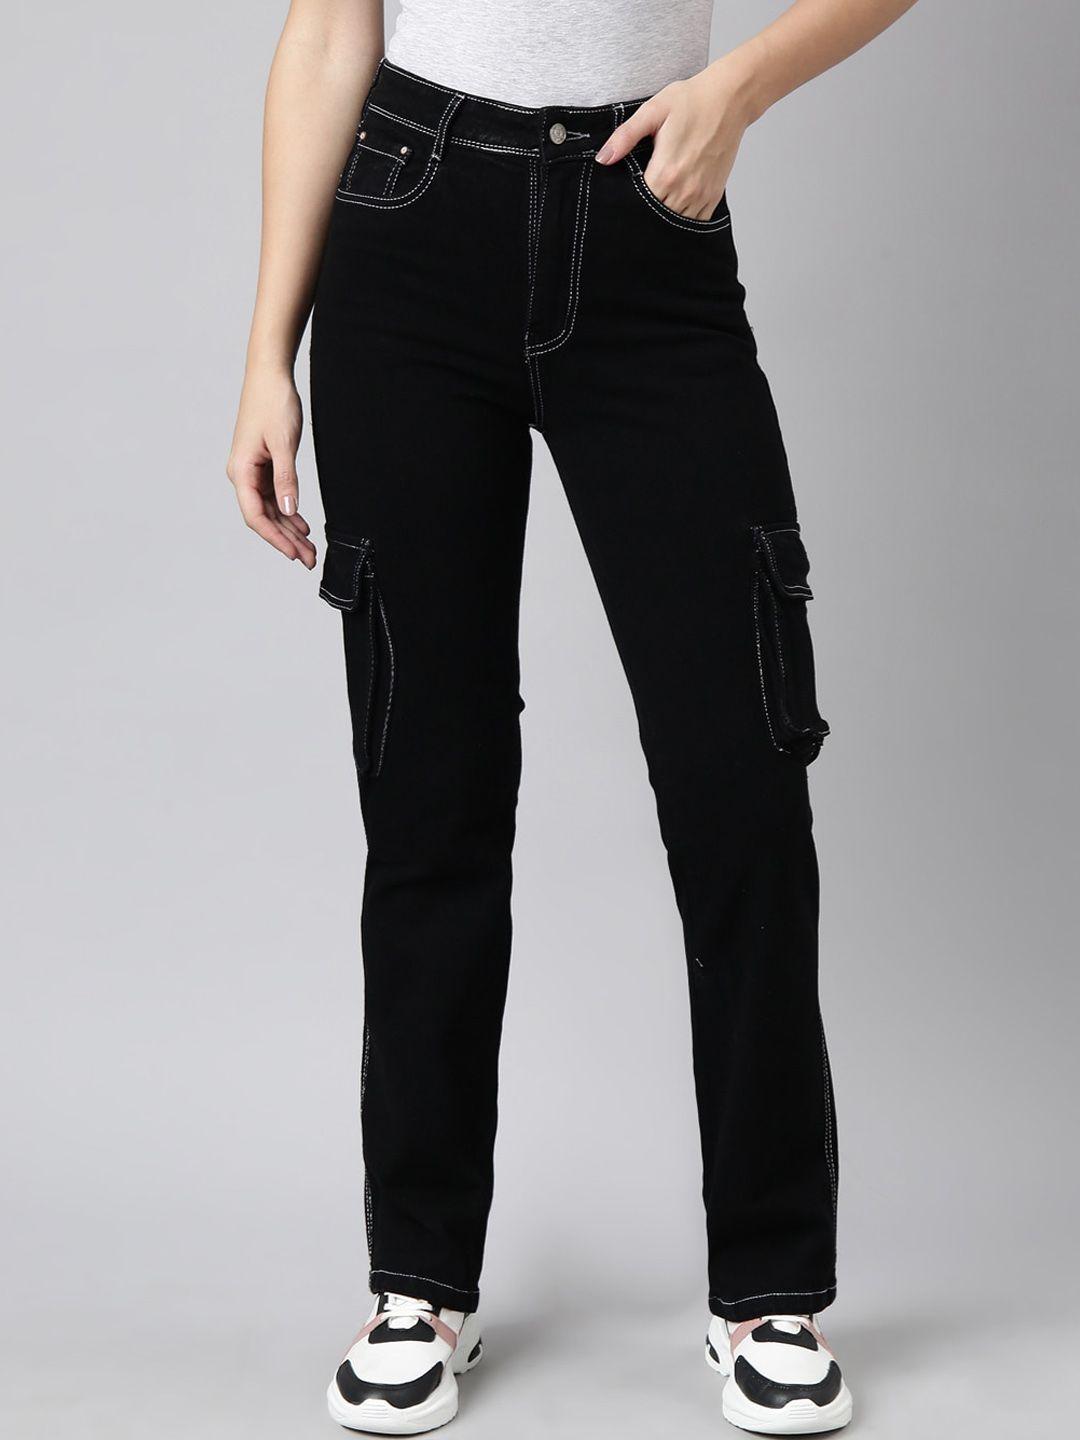 showoff-women-jean-straight-fit-clean-look-stretchable-cargo-jeans